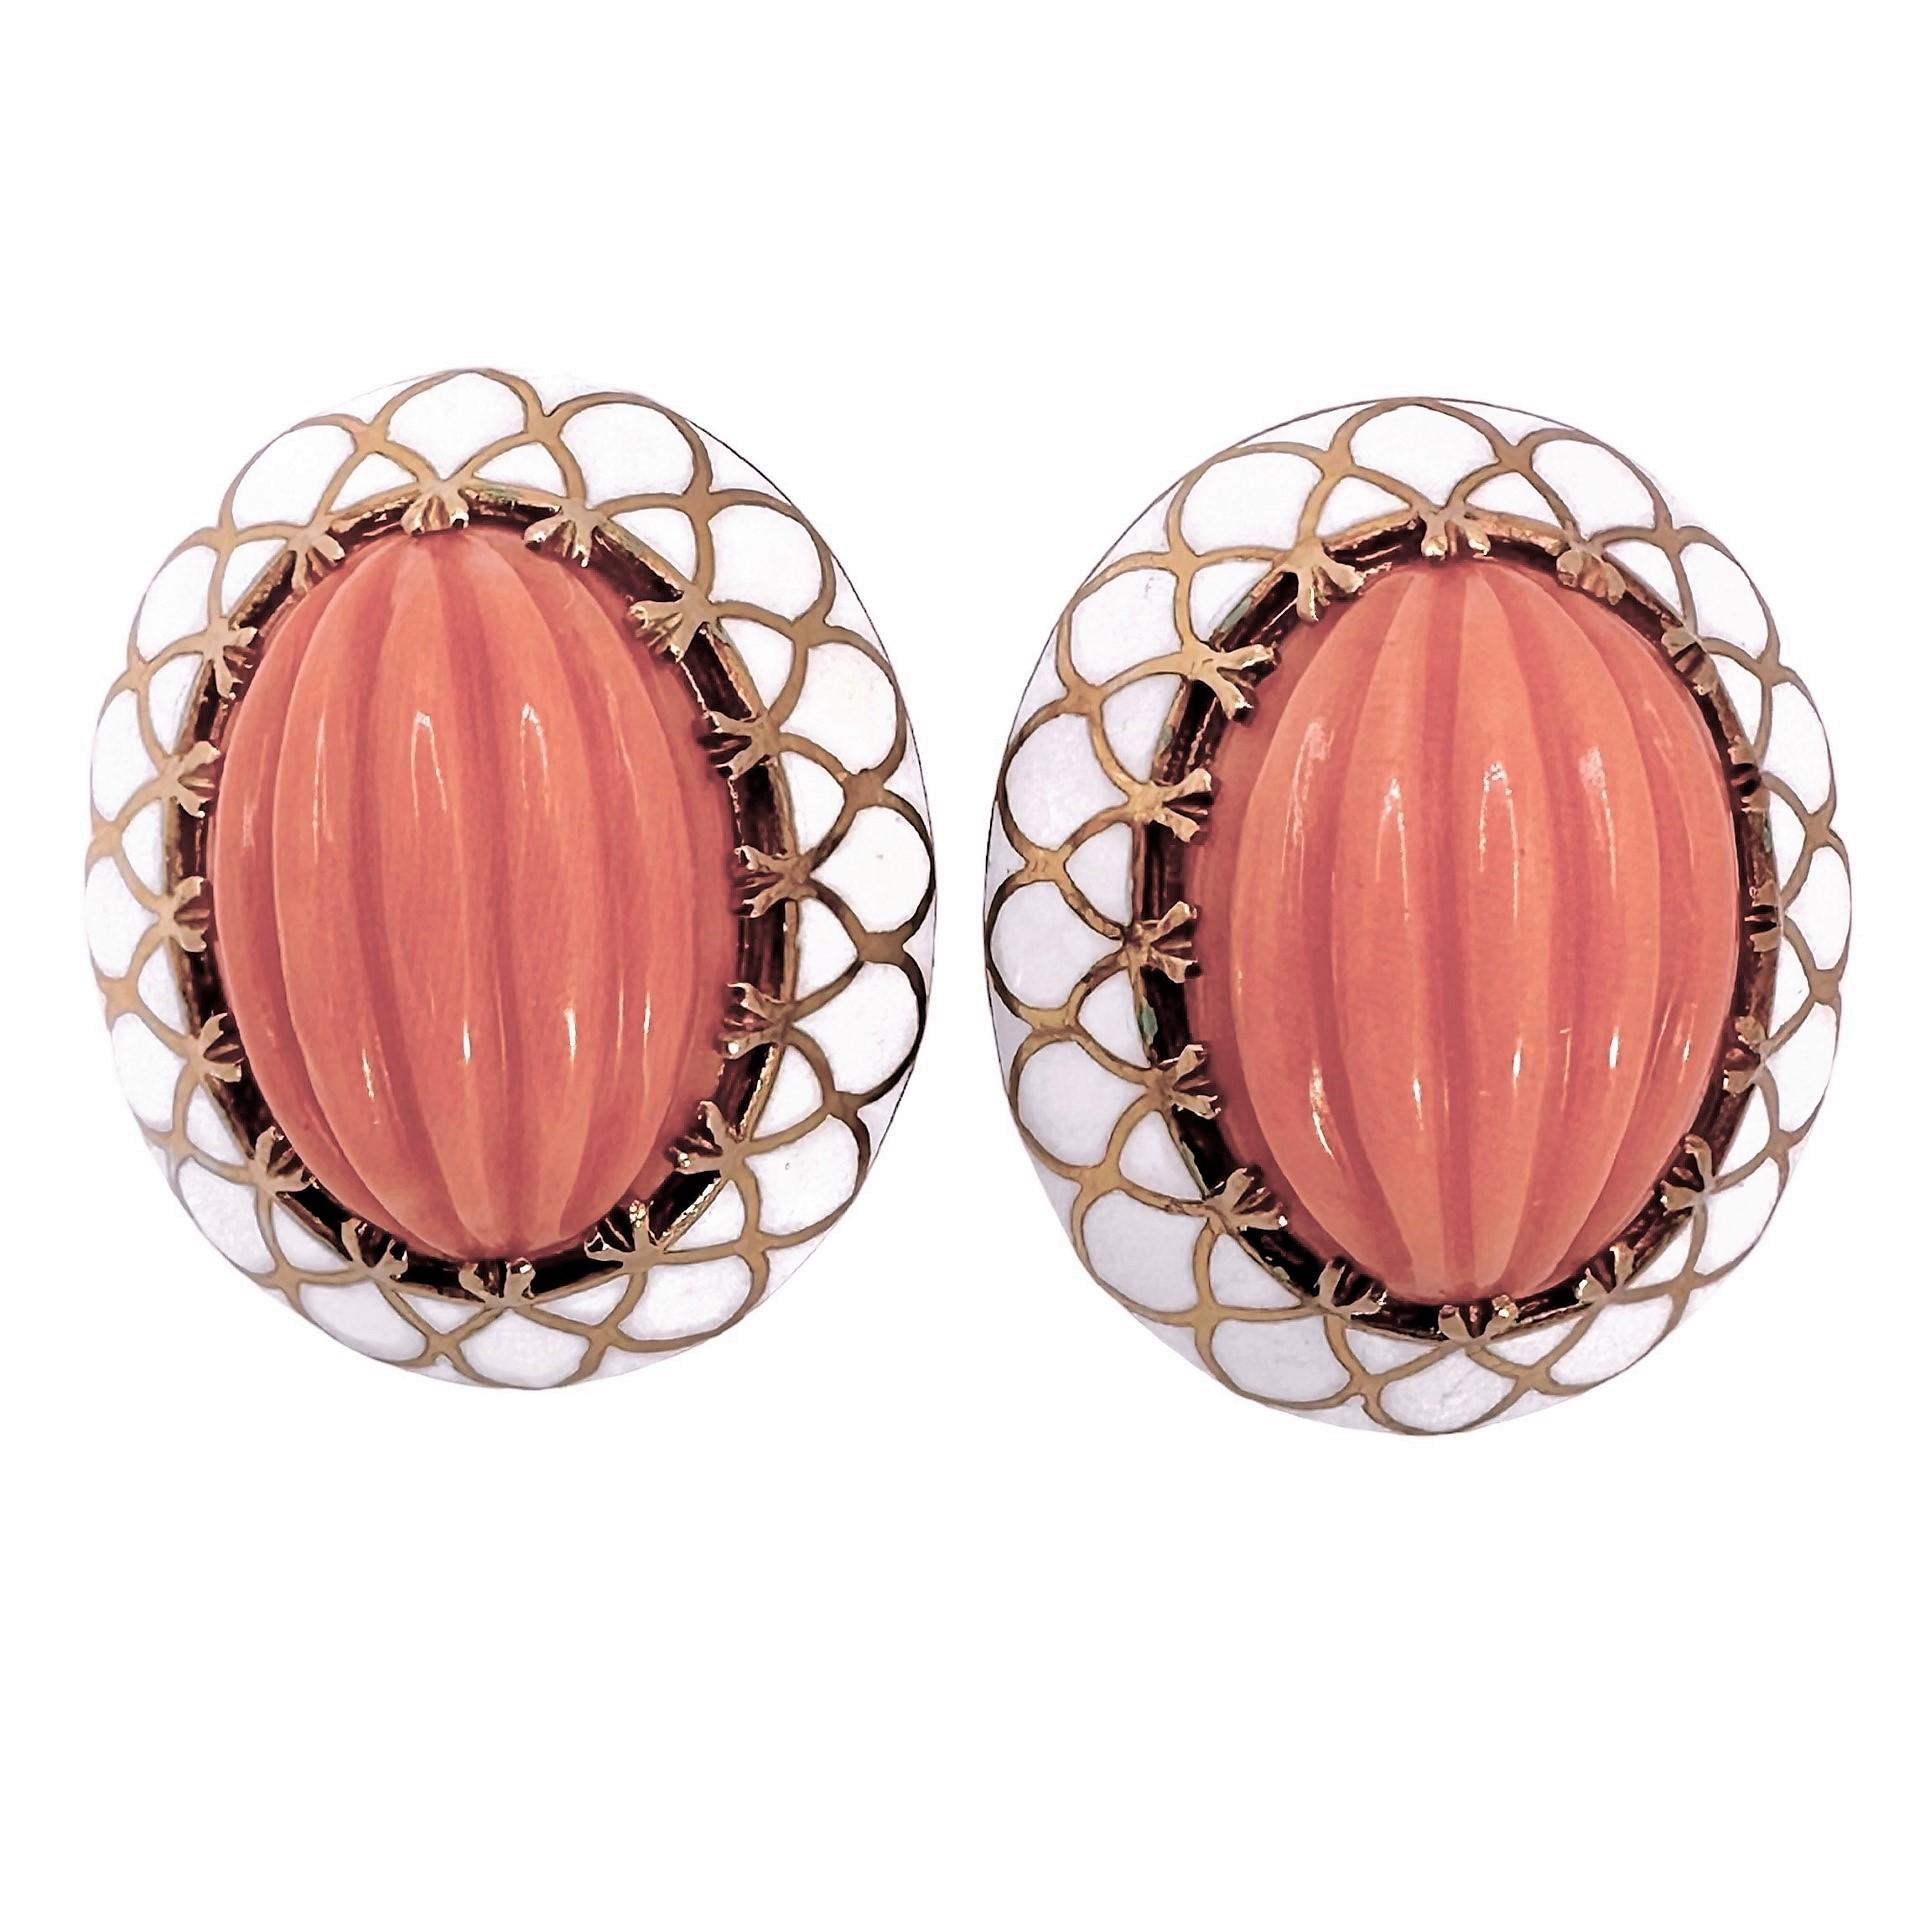 This lovely pair of Mid-20th Century 18k yellow gold fashion earrings are ideal for summer! They have a light and airy feel about them. The delicately fluted coral cabochons, each measuring 3/4 inches by 9/16 inch, are a velvety salmon color. 